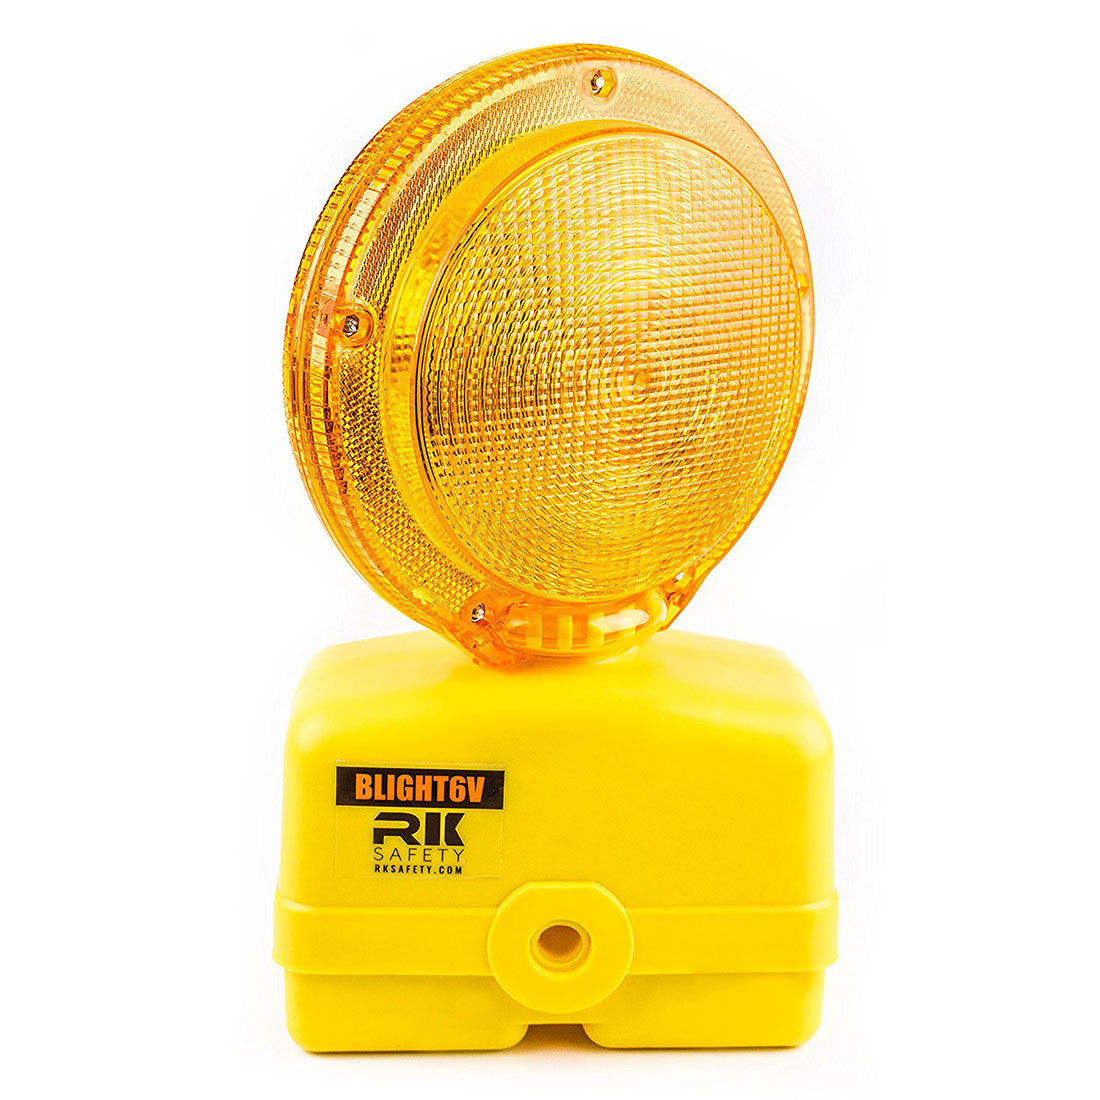 RK Safety BLIGHT4D Barricade Light D-cell with Photocell 3-Way Switch 